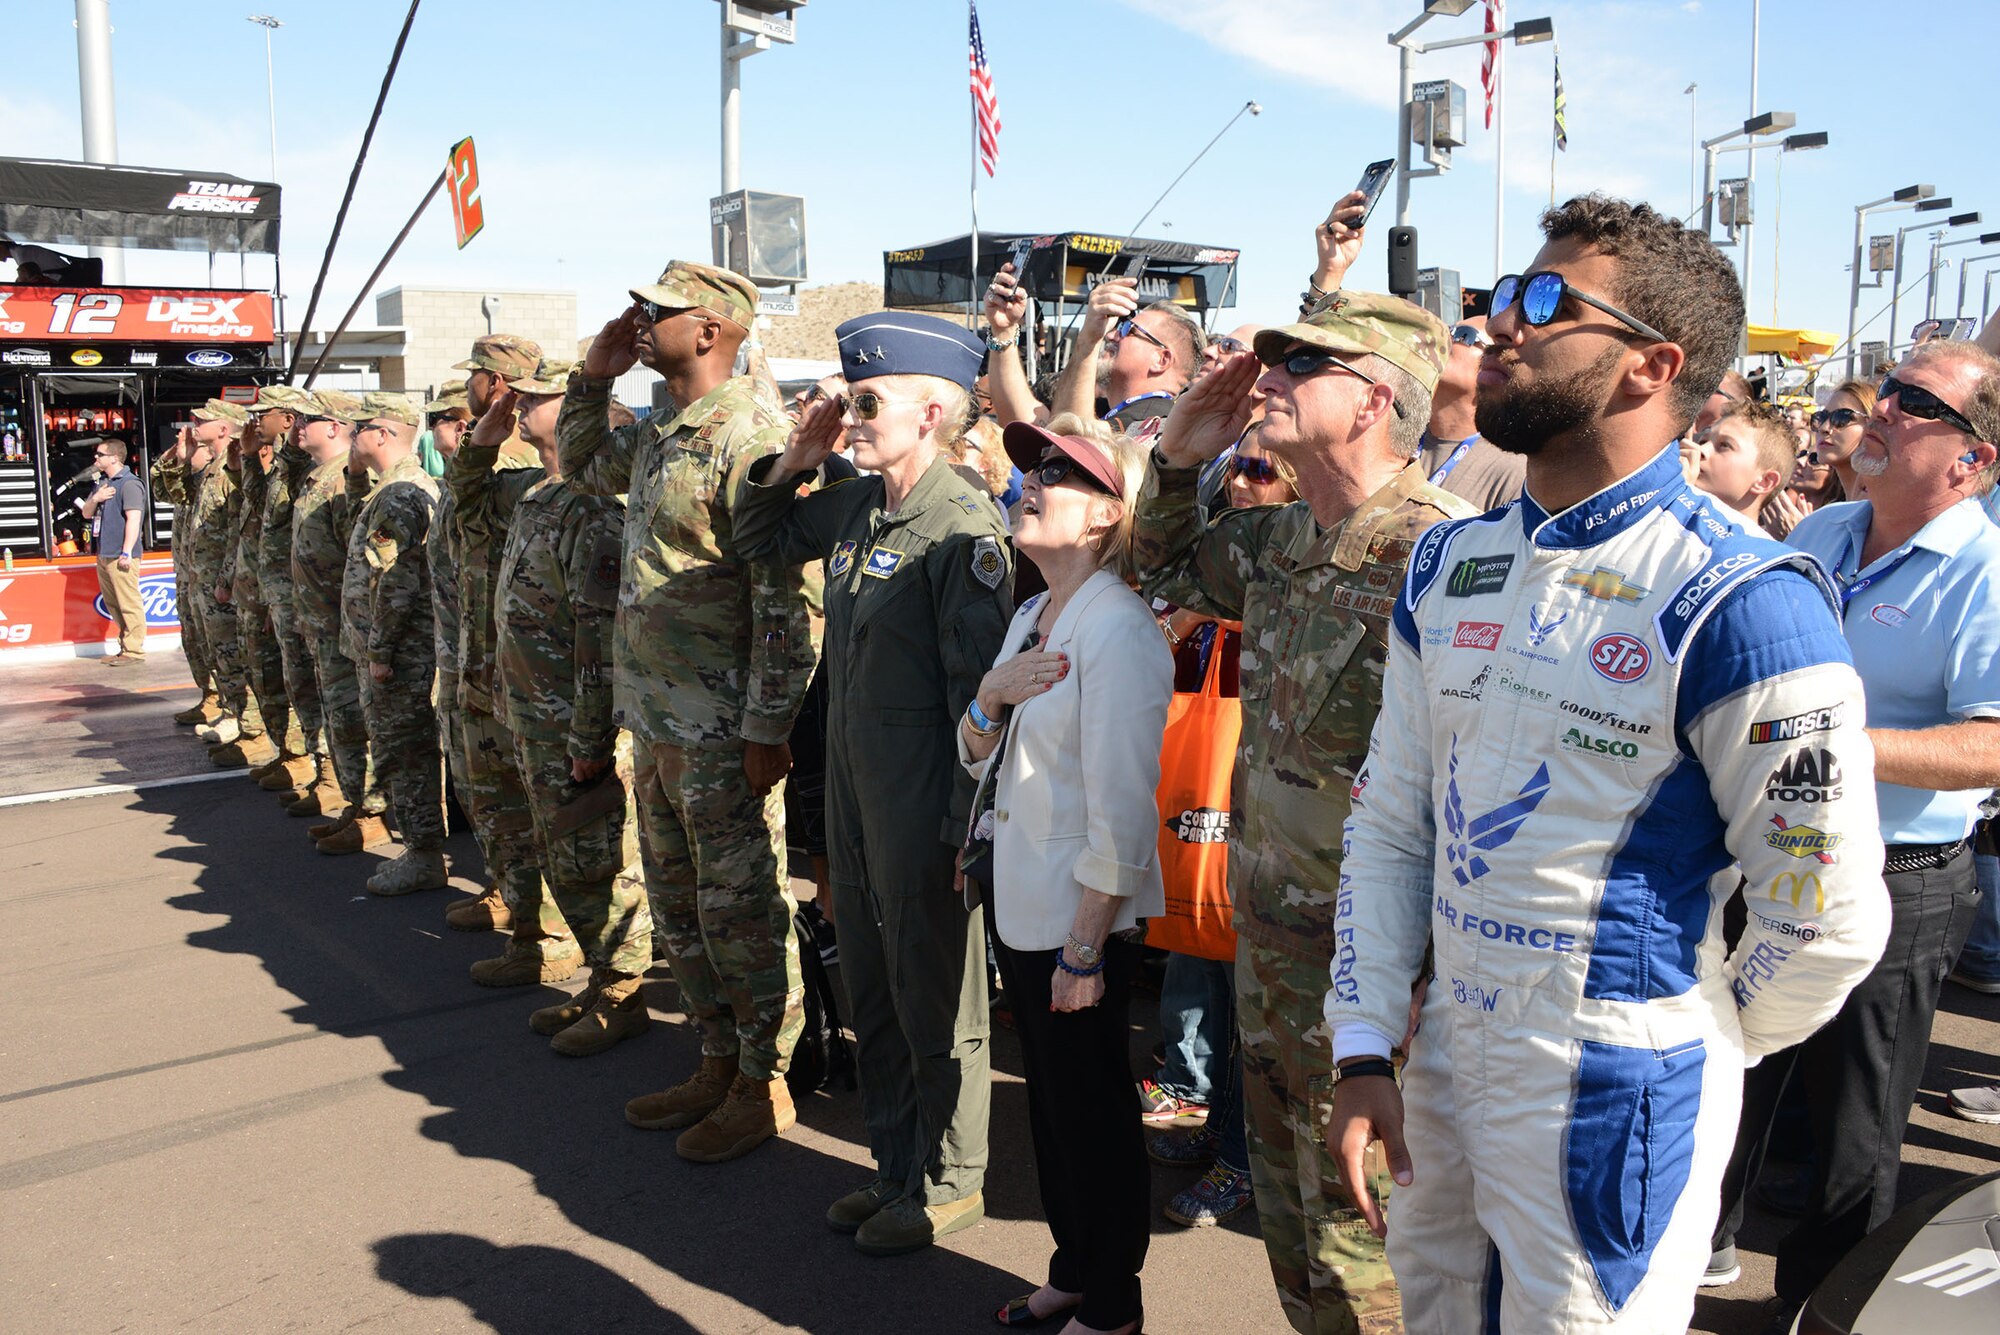 Bubba Wallace, driver of the Air Force No. 43 car, Gen. David. L. Goldfein, the Air Force chief of staff,  and his wife Dawn Goldfien, Maj. Gen. Jeannie Leavitt, Air Force Recruiting Service, commander, and members of the Air Force during the national anthem before the the Bluegreen Vacations 500 NASCAR race in Phoenix.